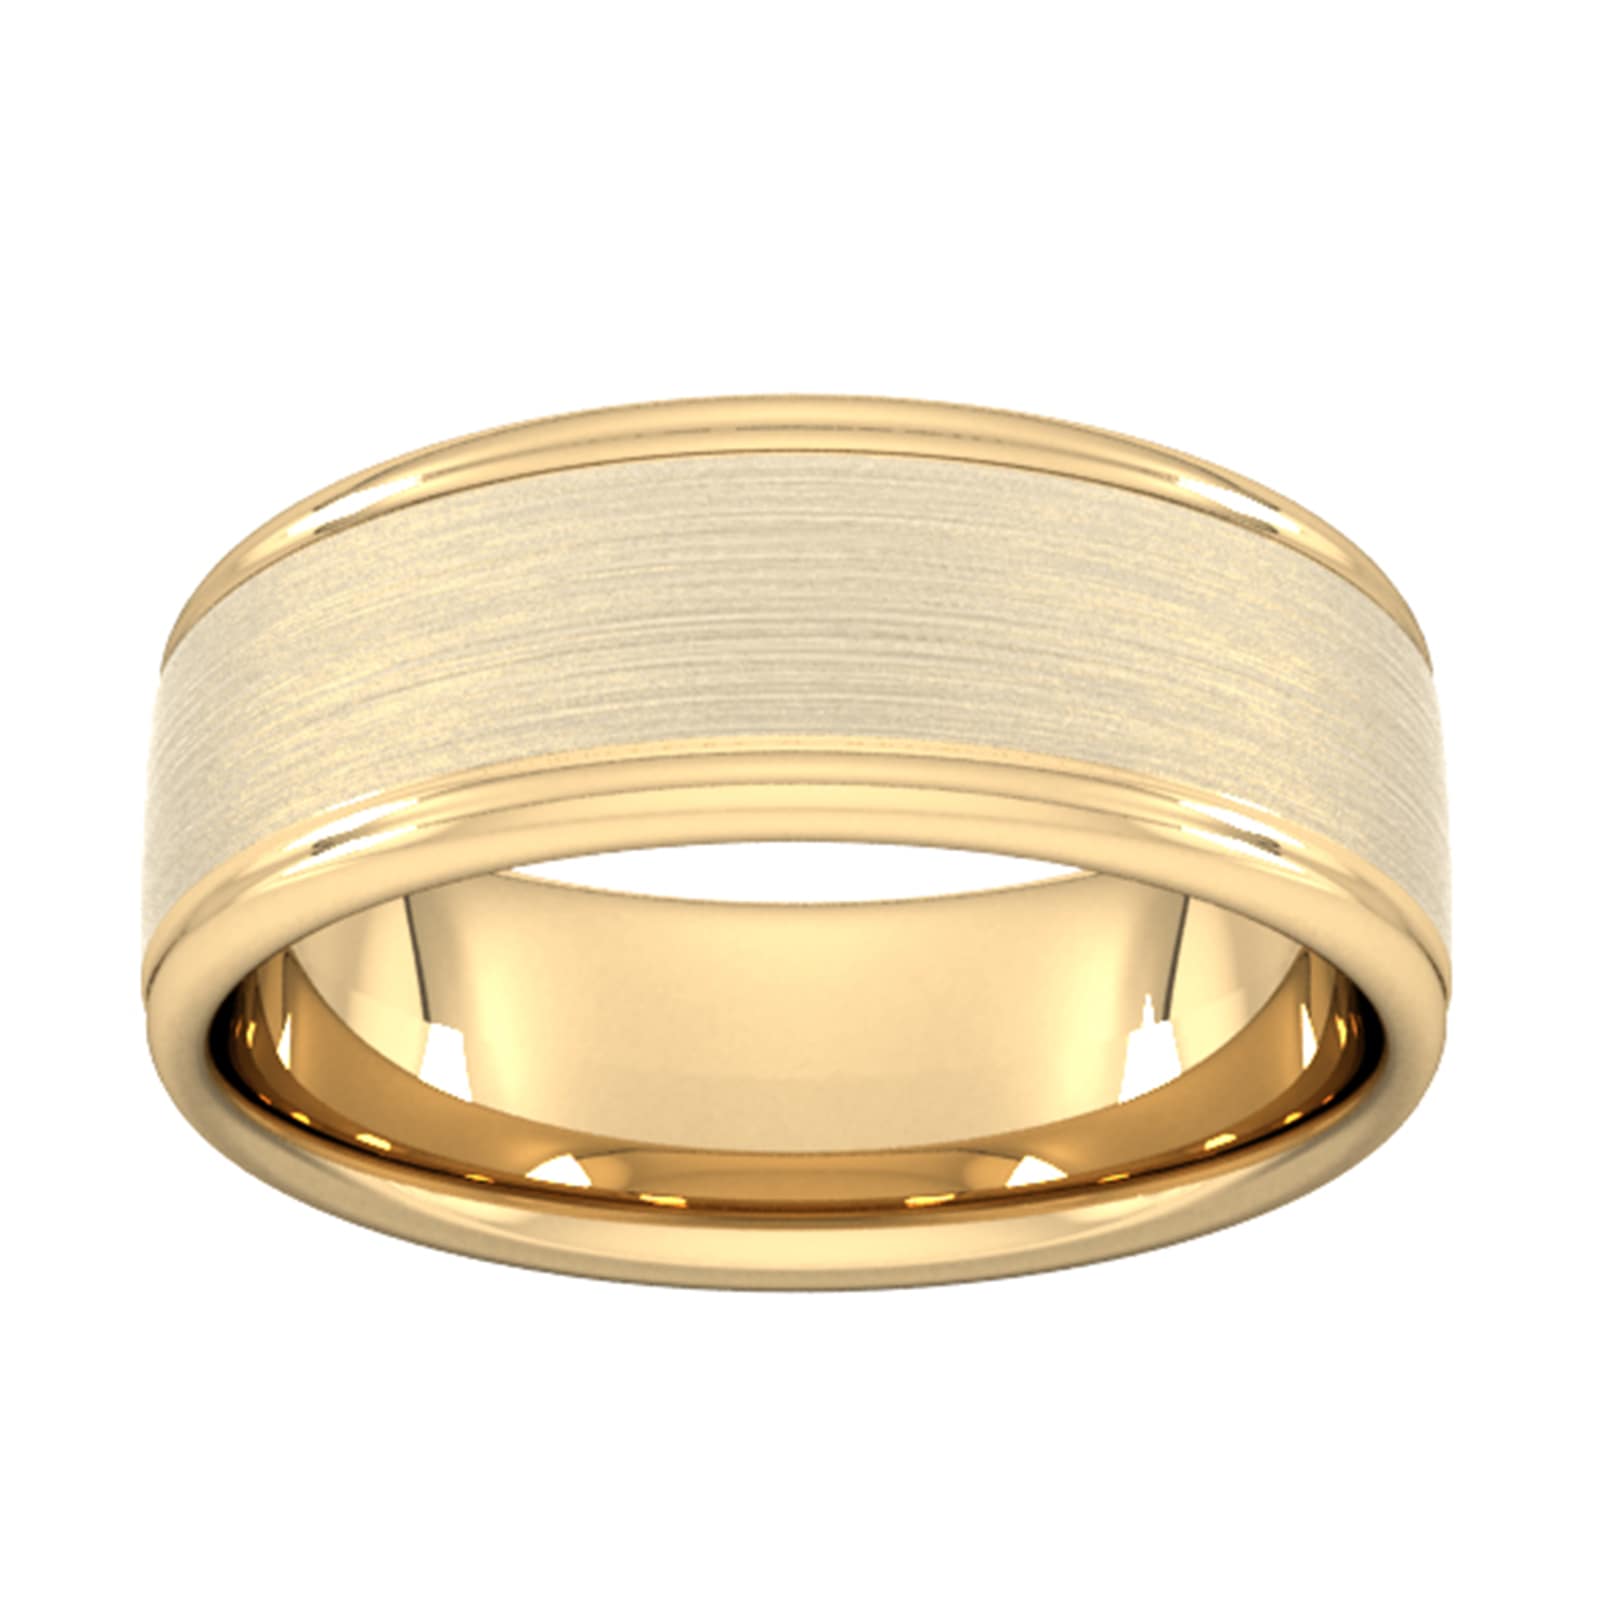 8mm Slight Court Extra Heavy Matt Centre With Grooves Wedding Ring In 9 Carat Yellow Gold - Ring Size S